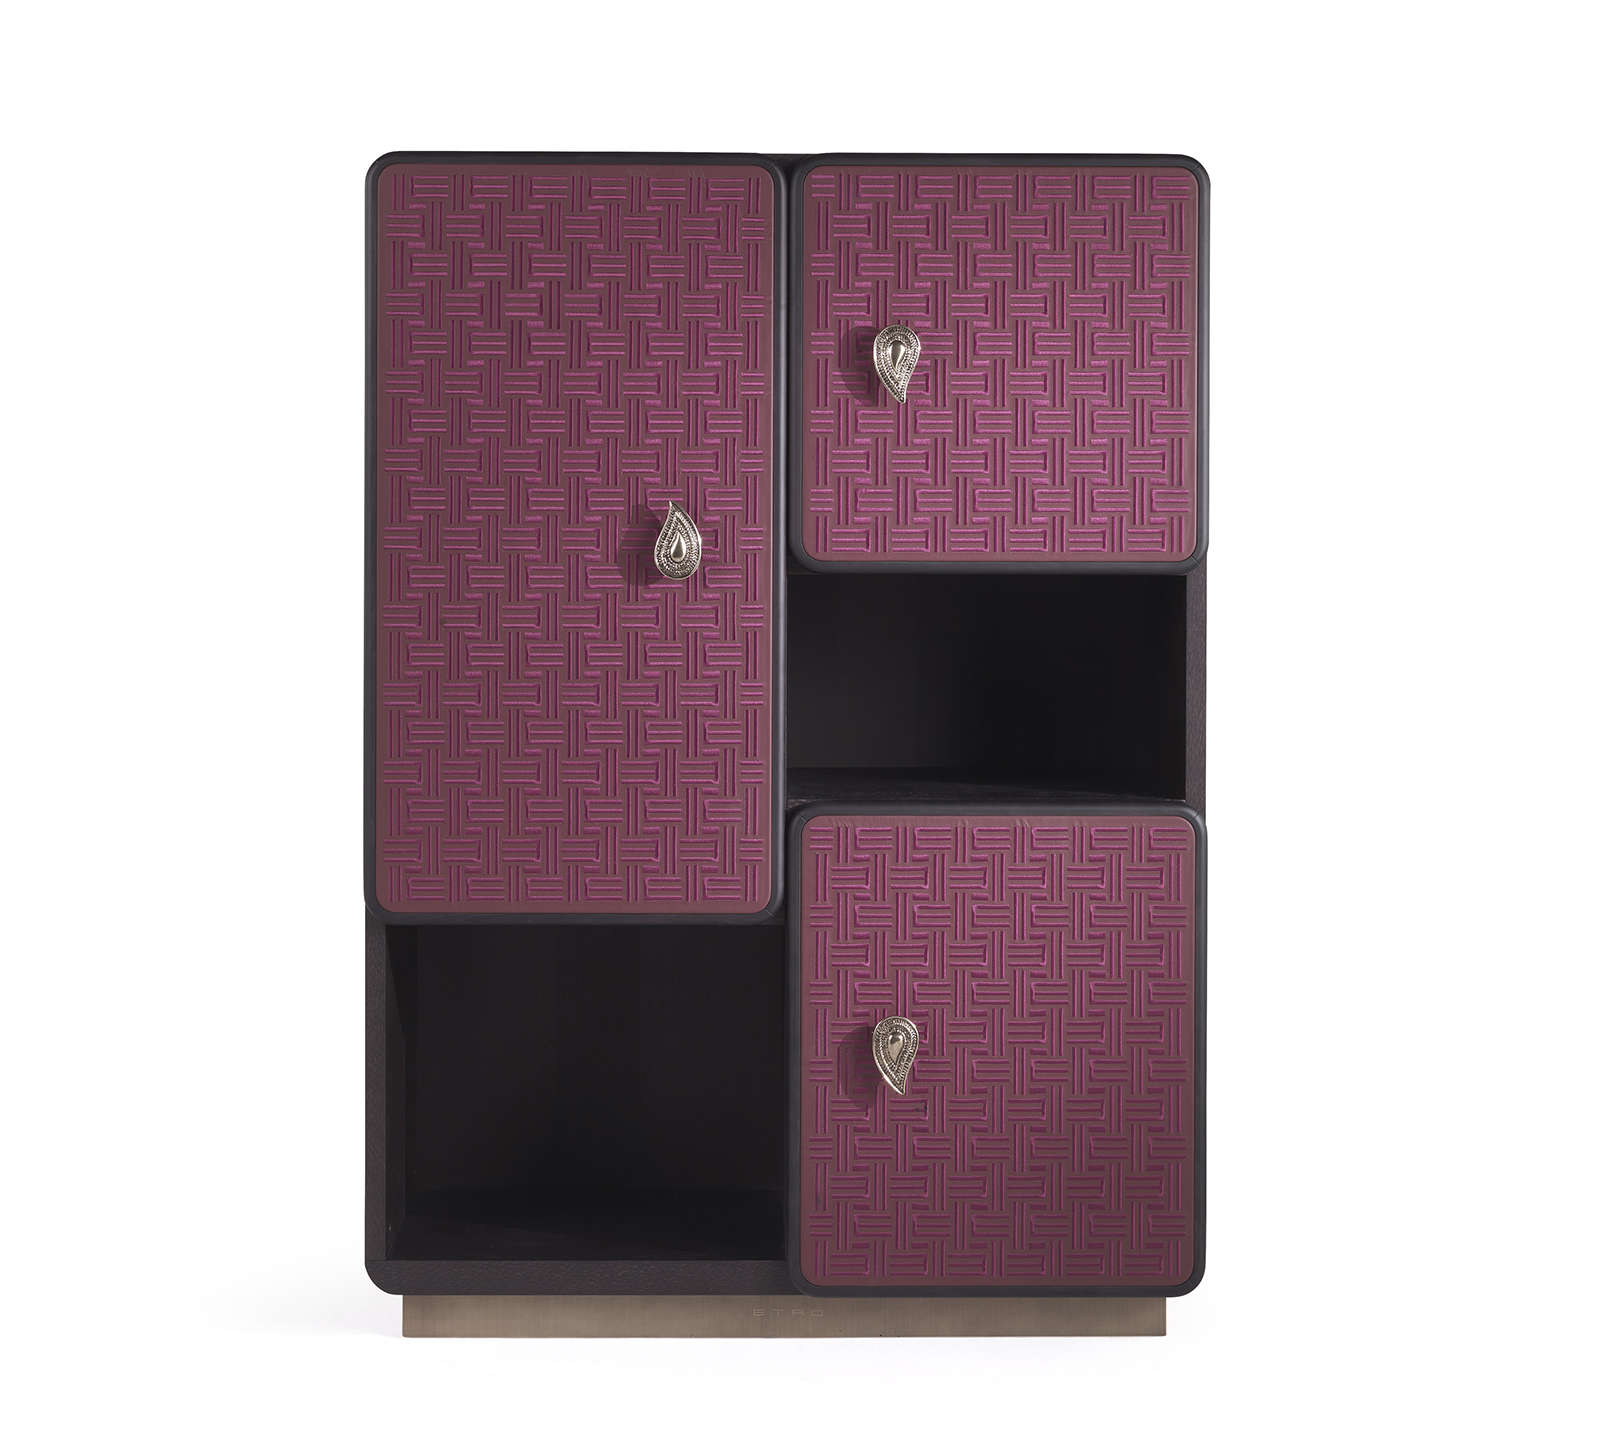 ETRO_CARAL_cabinet_cover